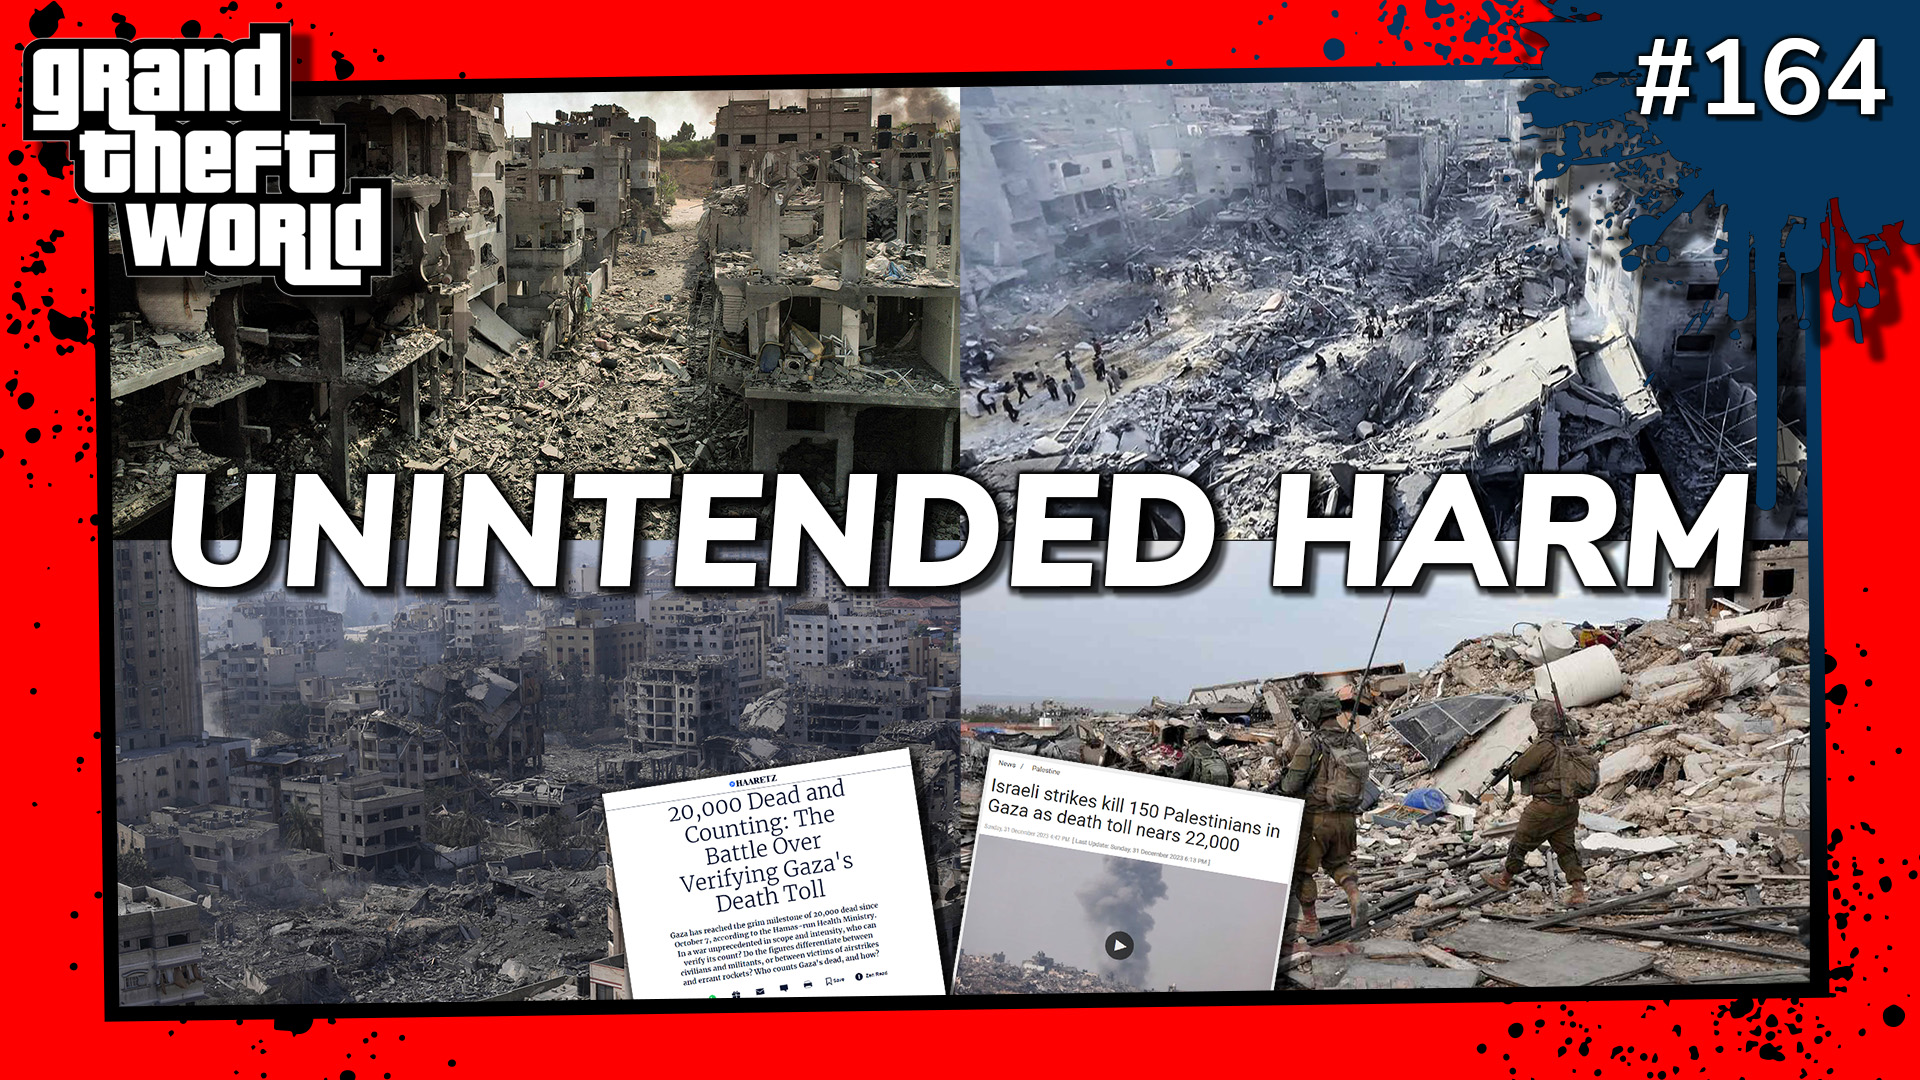 Grand Theft World Podcast 164 | Unintended Harm